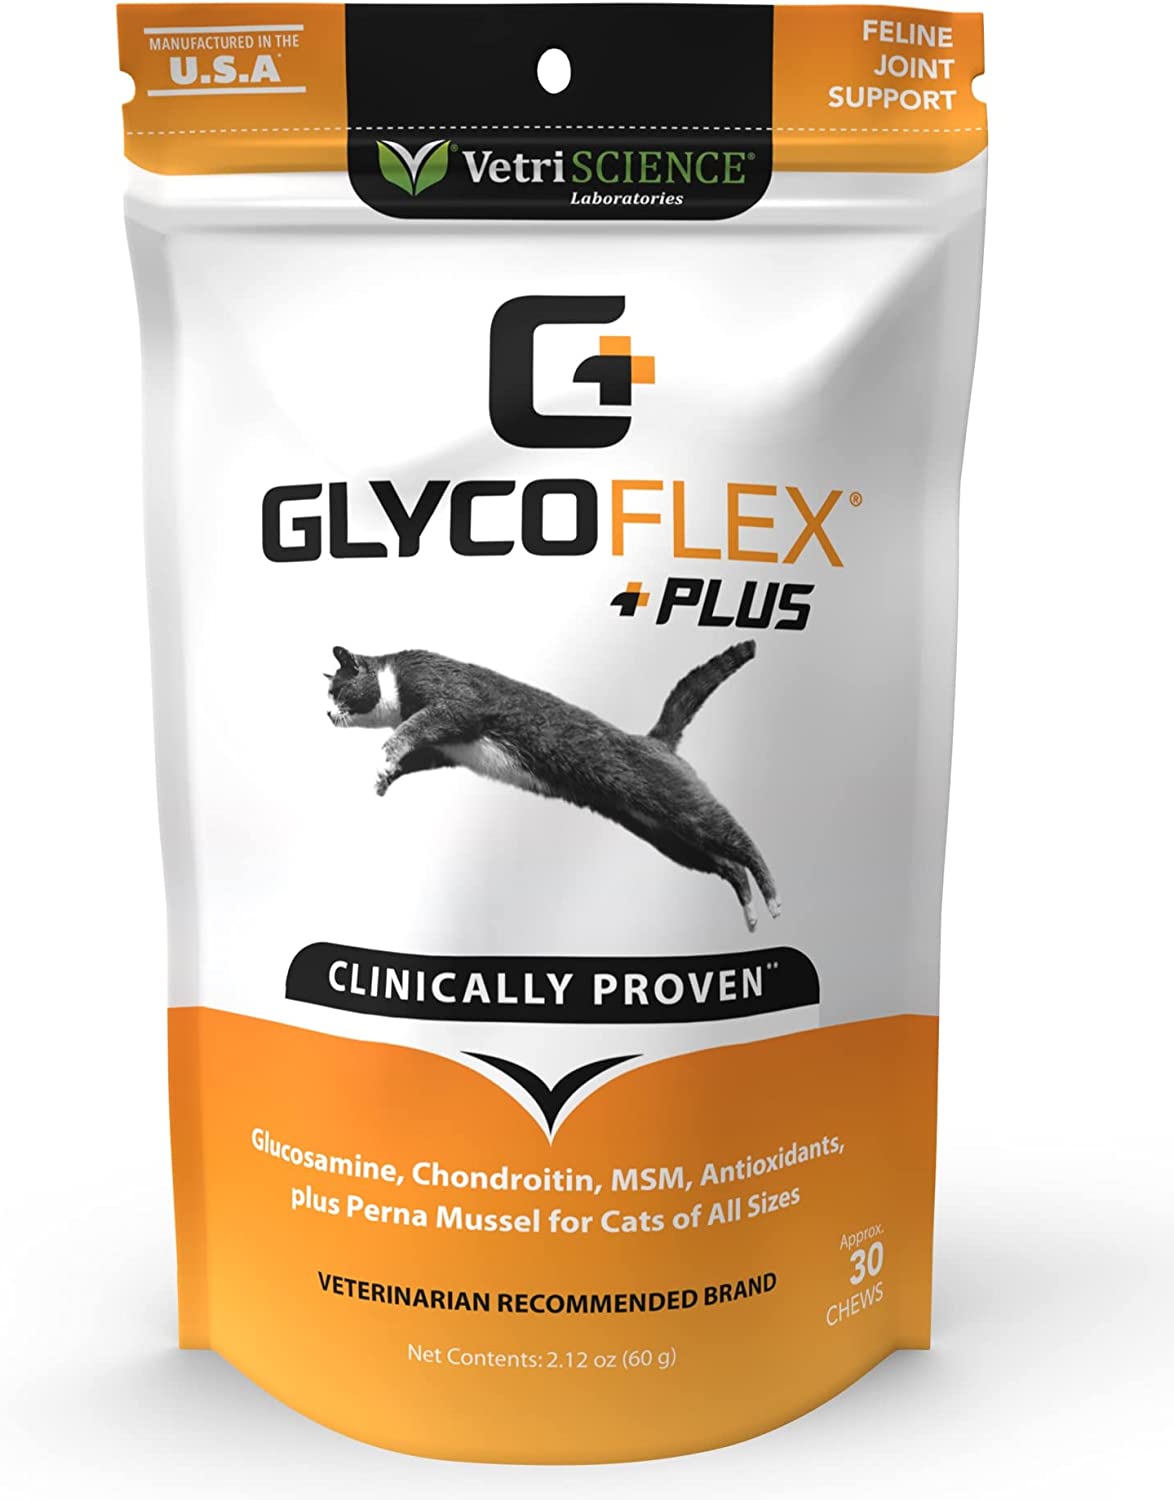 Glyco Flex Plus Joint Support for Cats by VETRISCIENCE